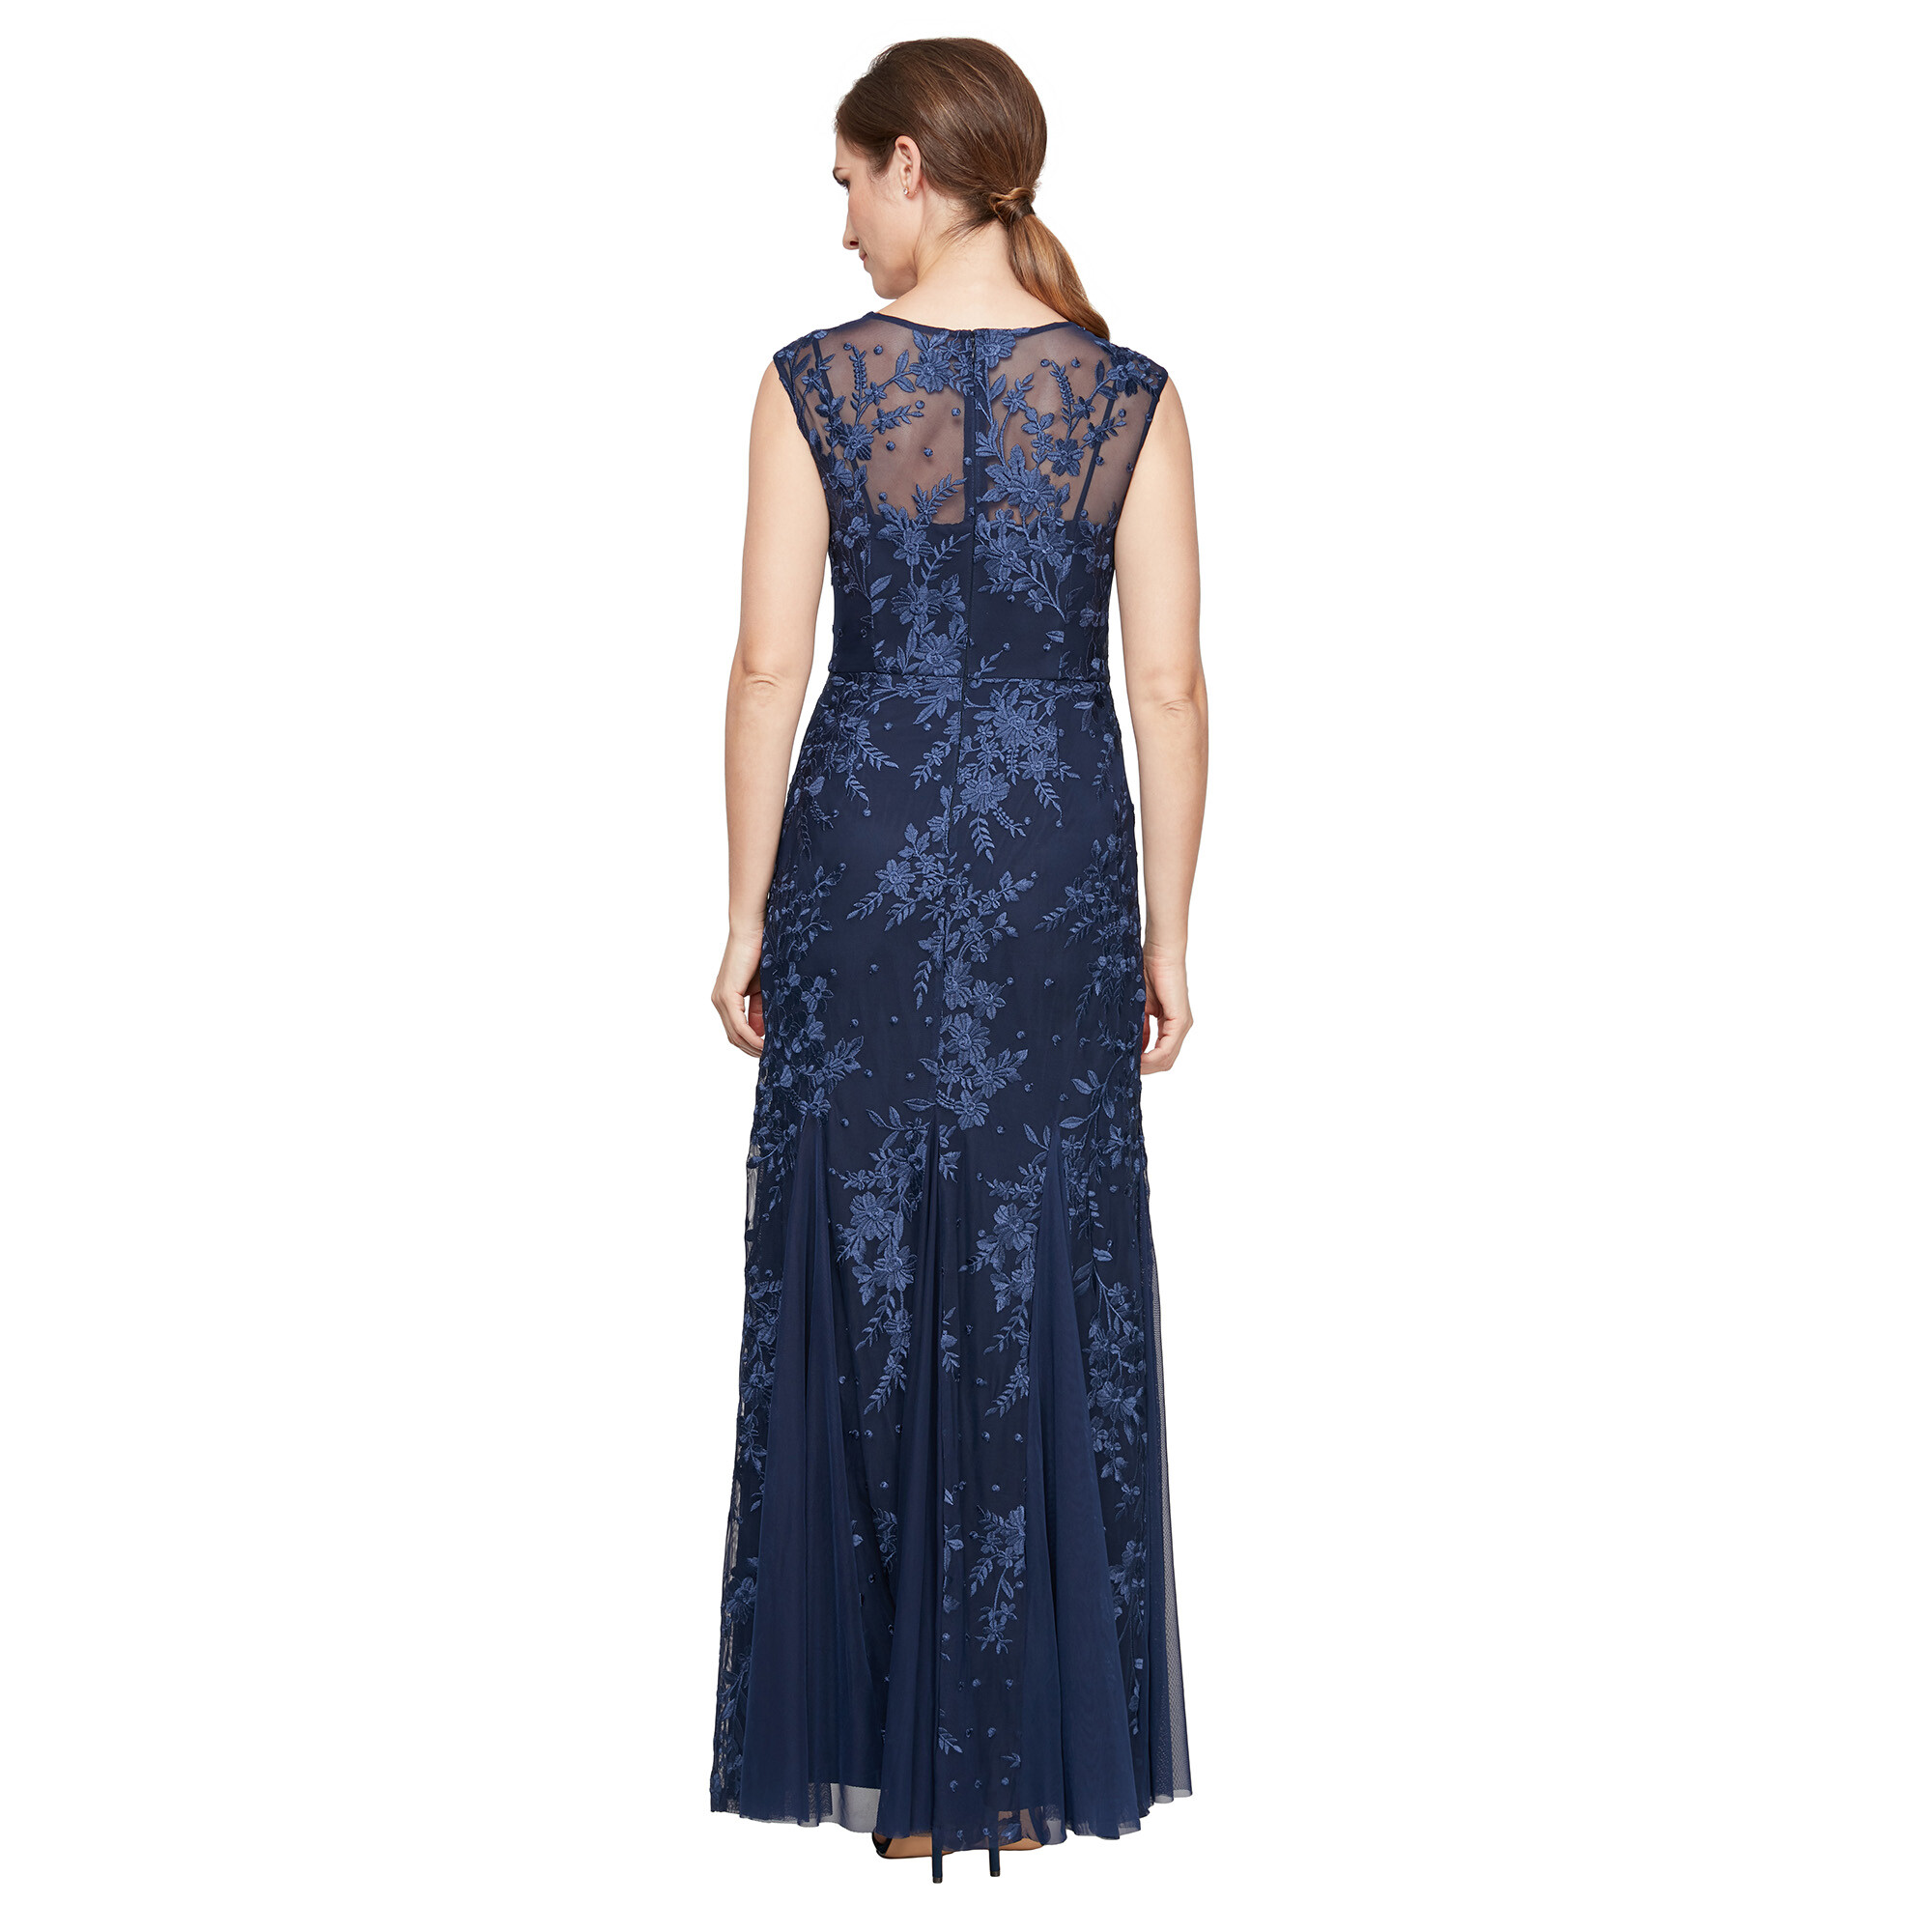 Imbracaminte Femei Alex Evenings Long Cap Sleeve Embroidered Dress with Illusion Neckline and Godet Detail Skirt Navy image1